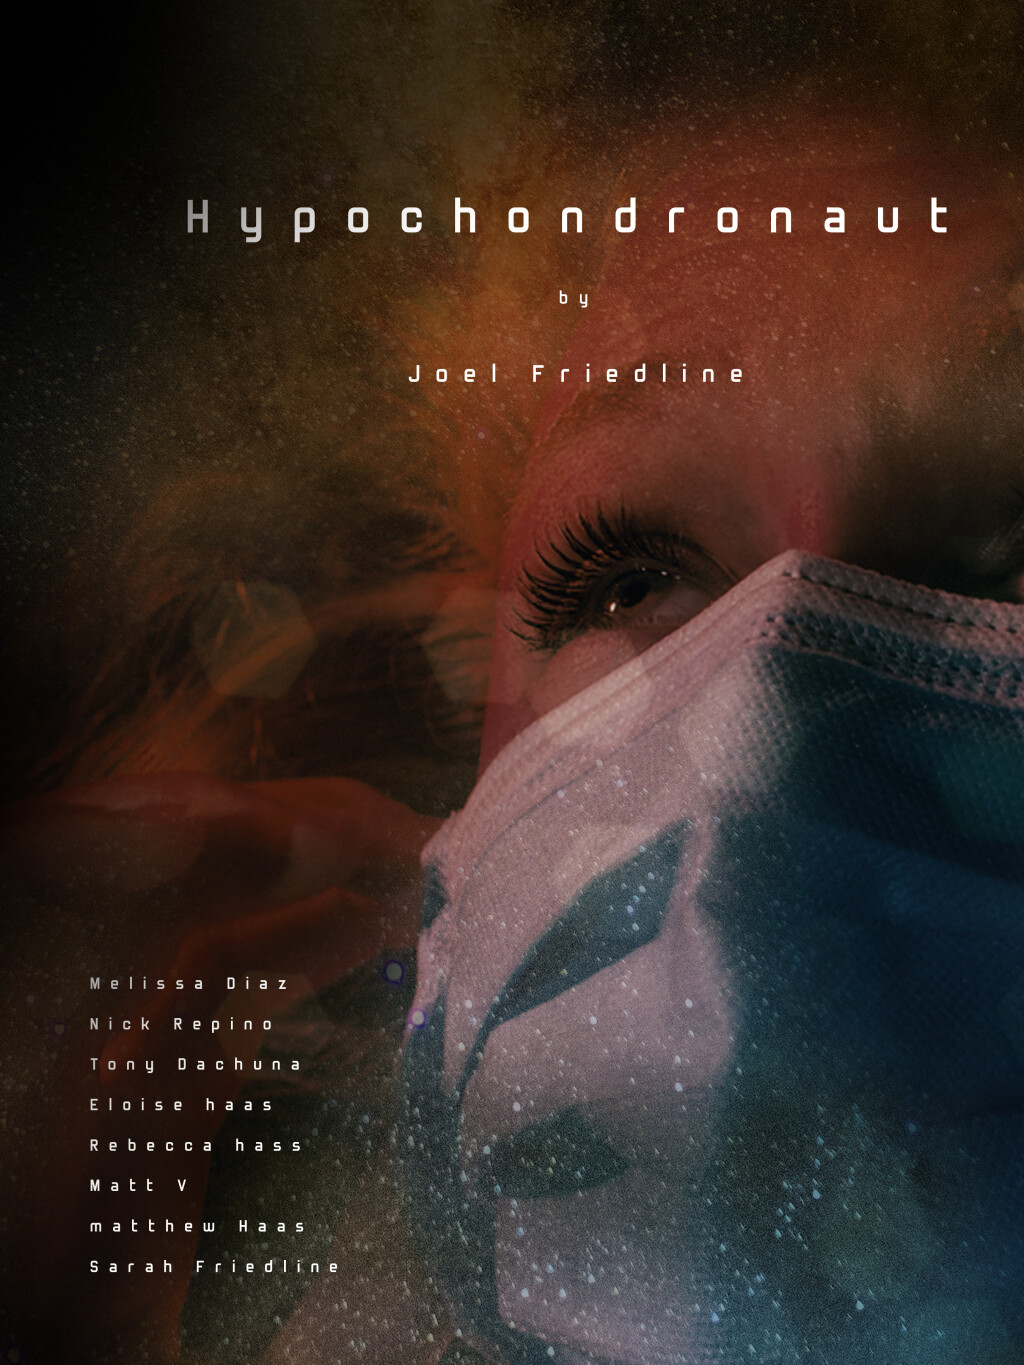 Filmposter for Hypochondronaut